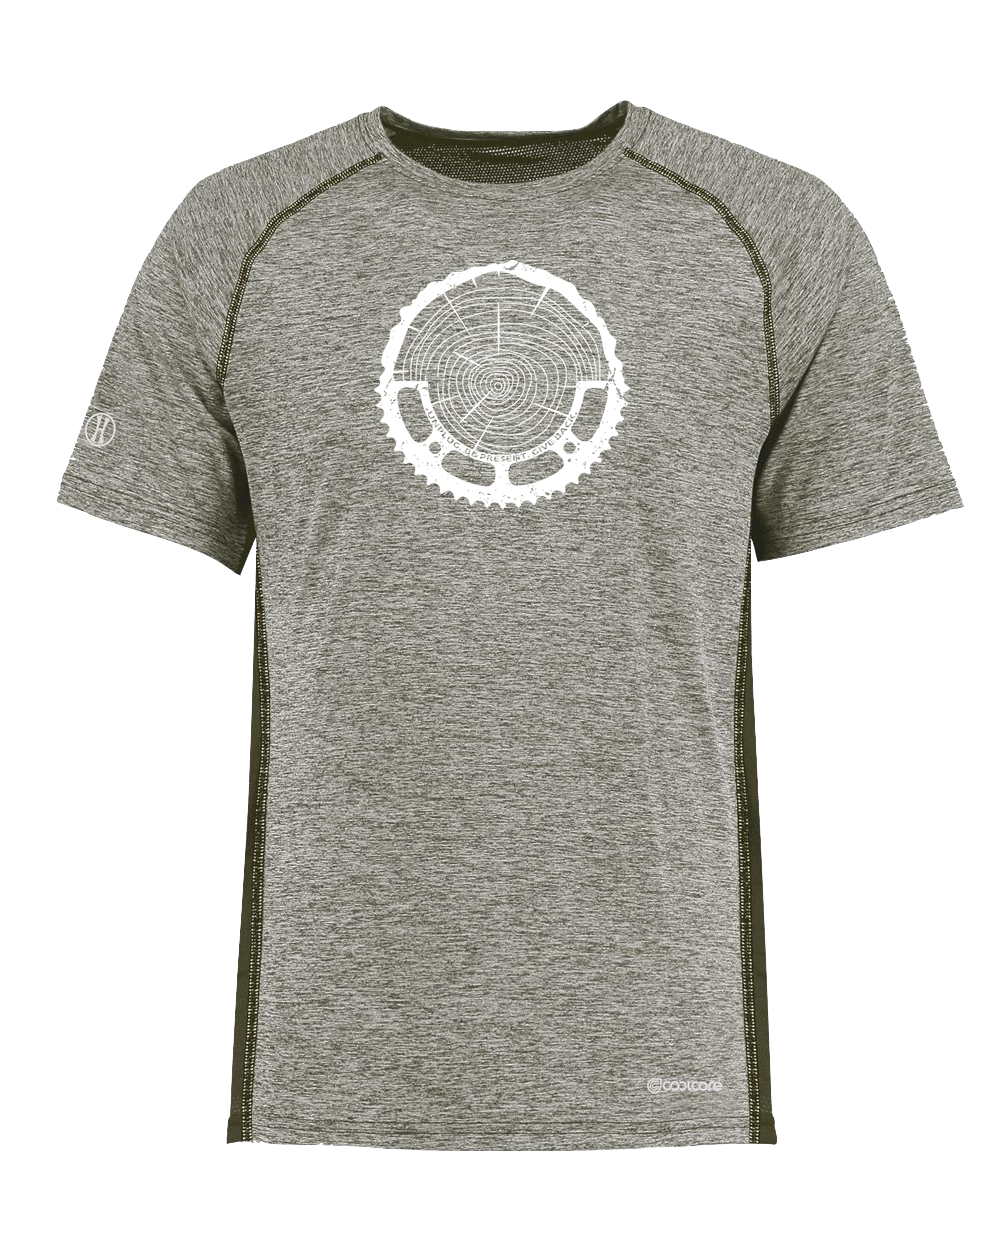 TREE RINGS CHAINRING Poly/Elastane High Performance T-Shirt with UPF 50+